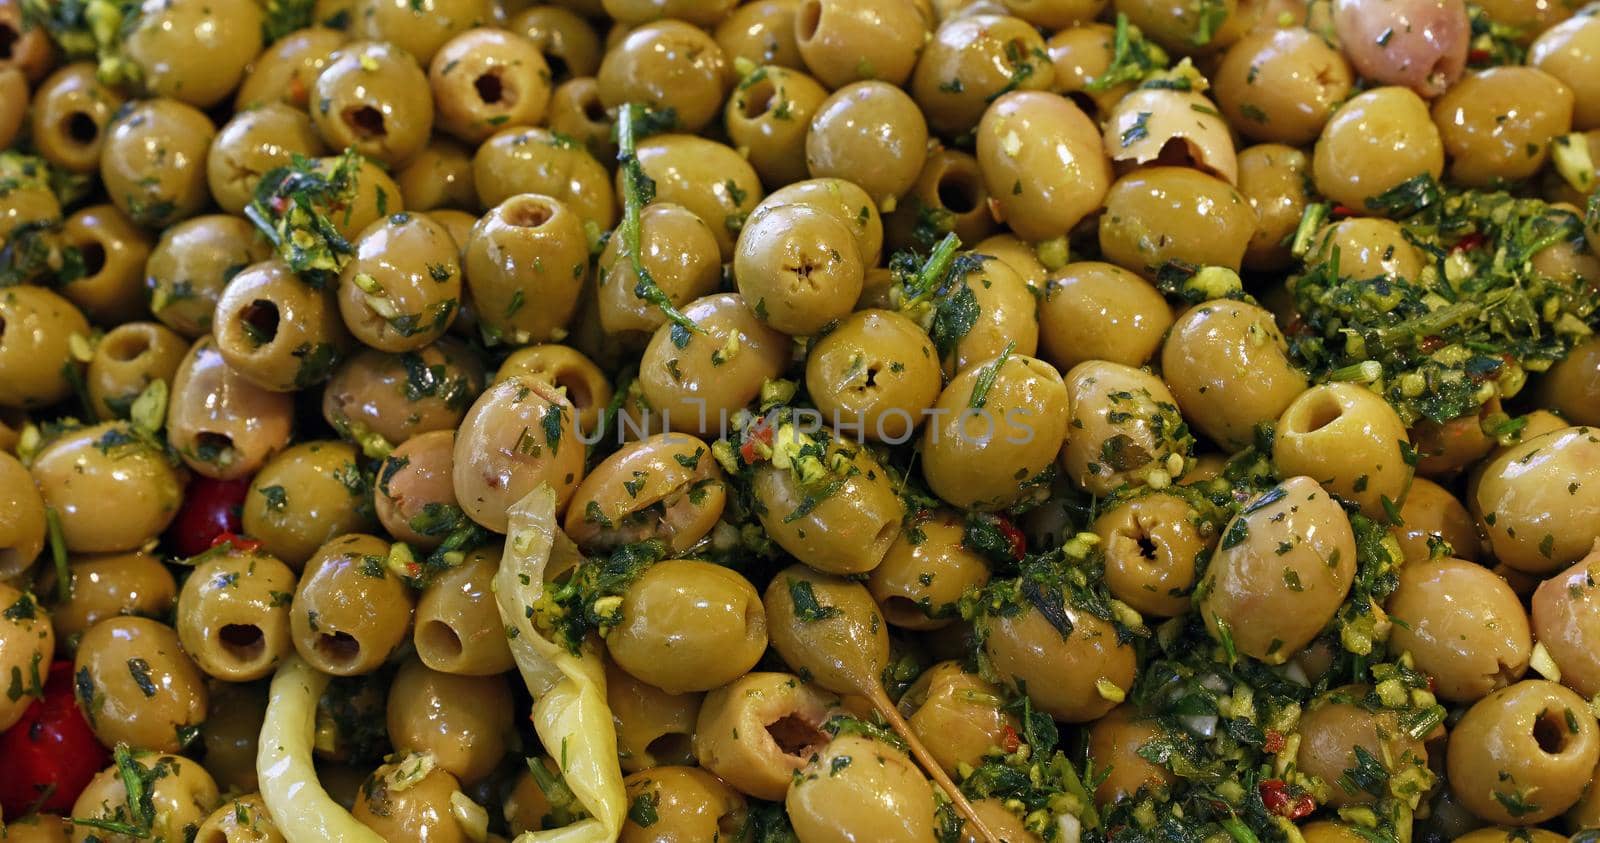 Pickled green olives with herbs on retail display by BreakingTheWalls